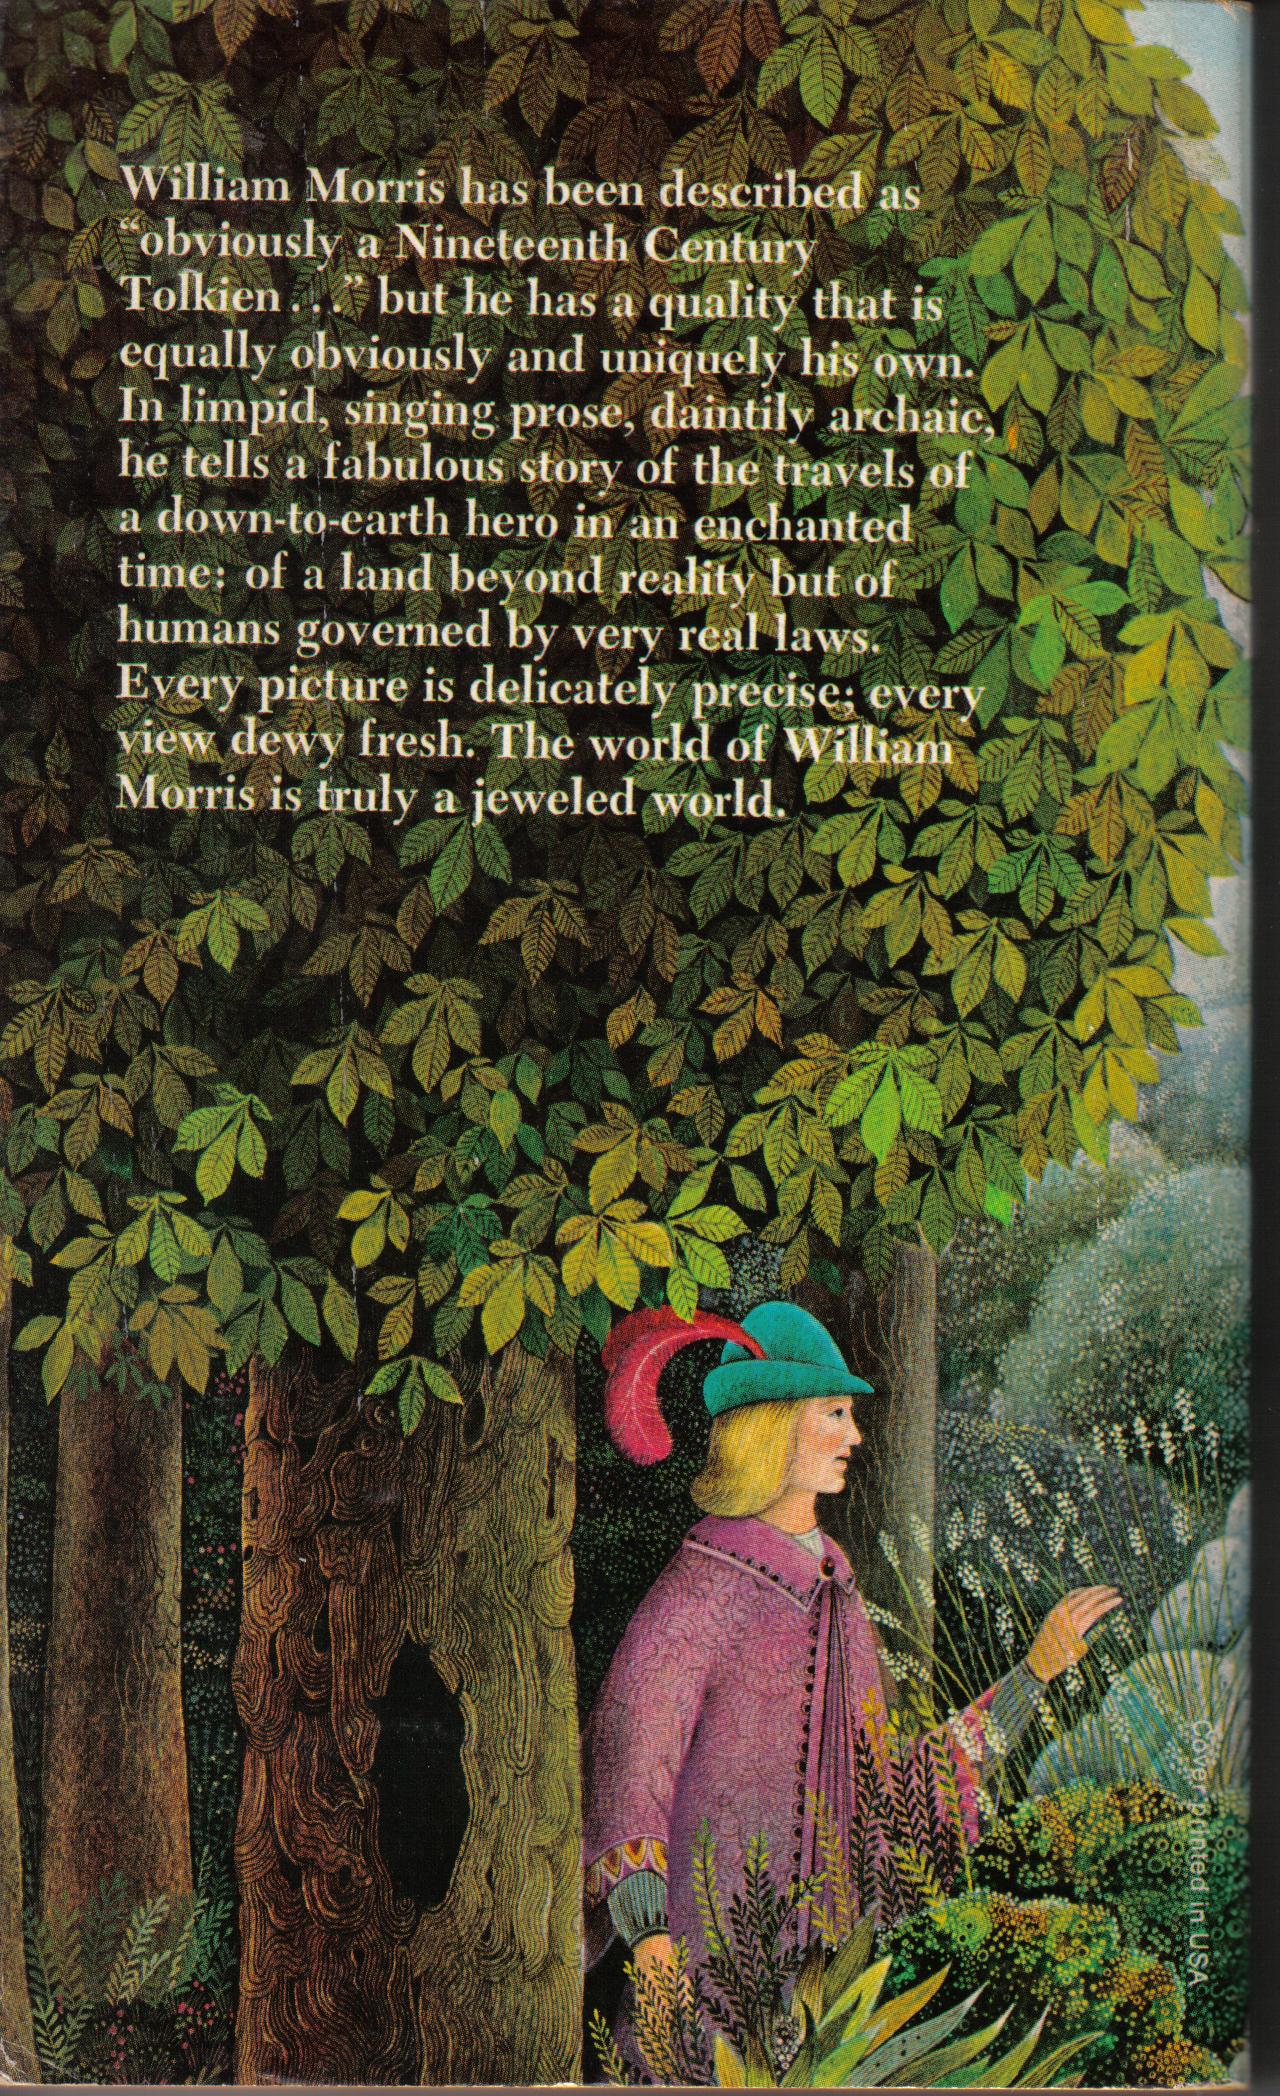 The Ballantine Adult Fantasy Series The Wood Beyond the World by William Morris